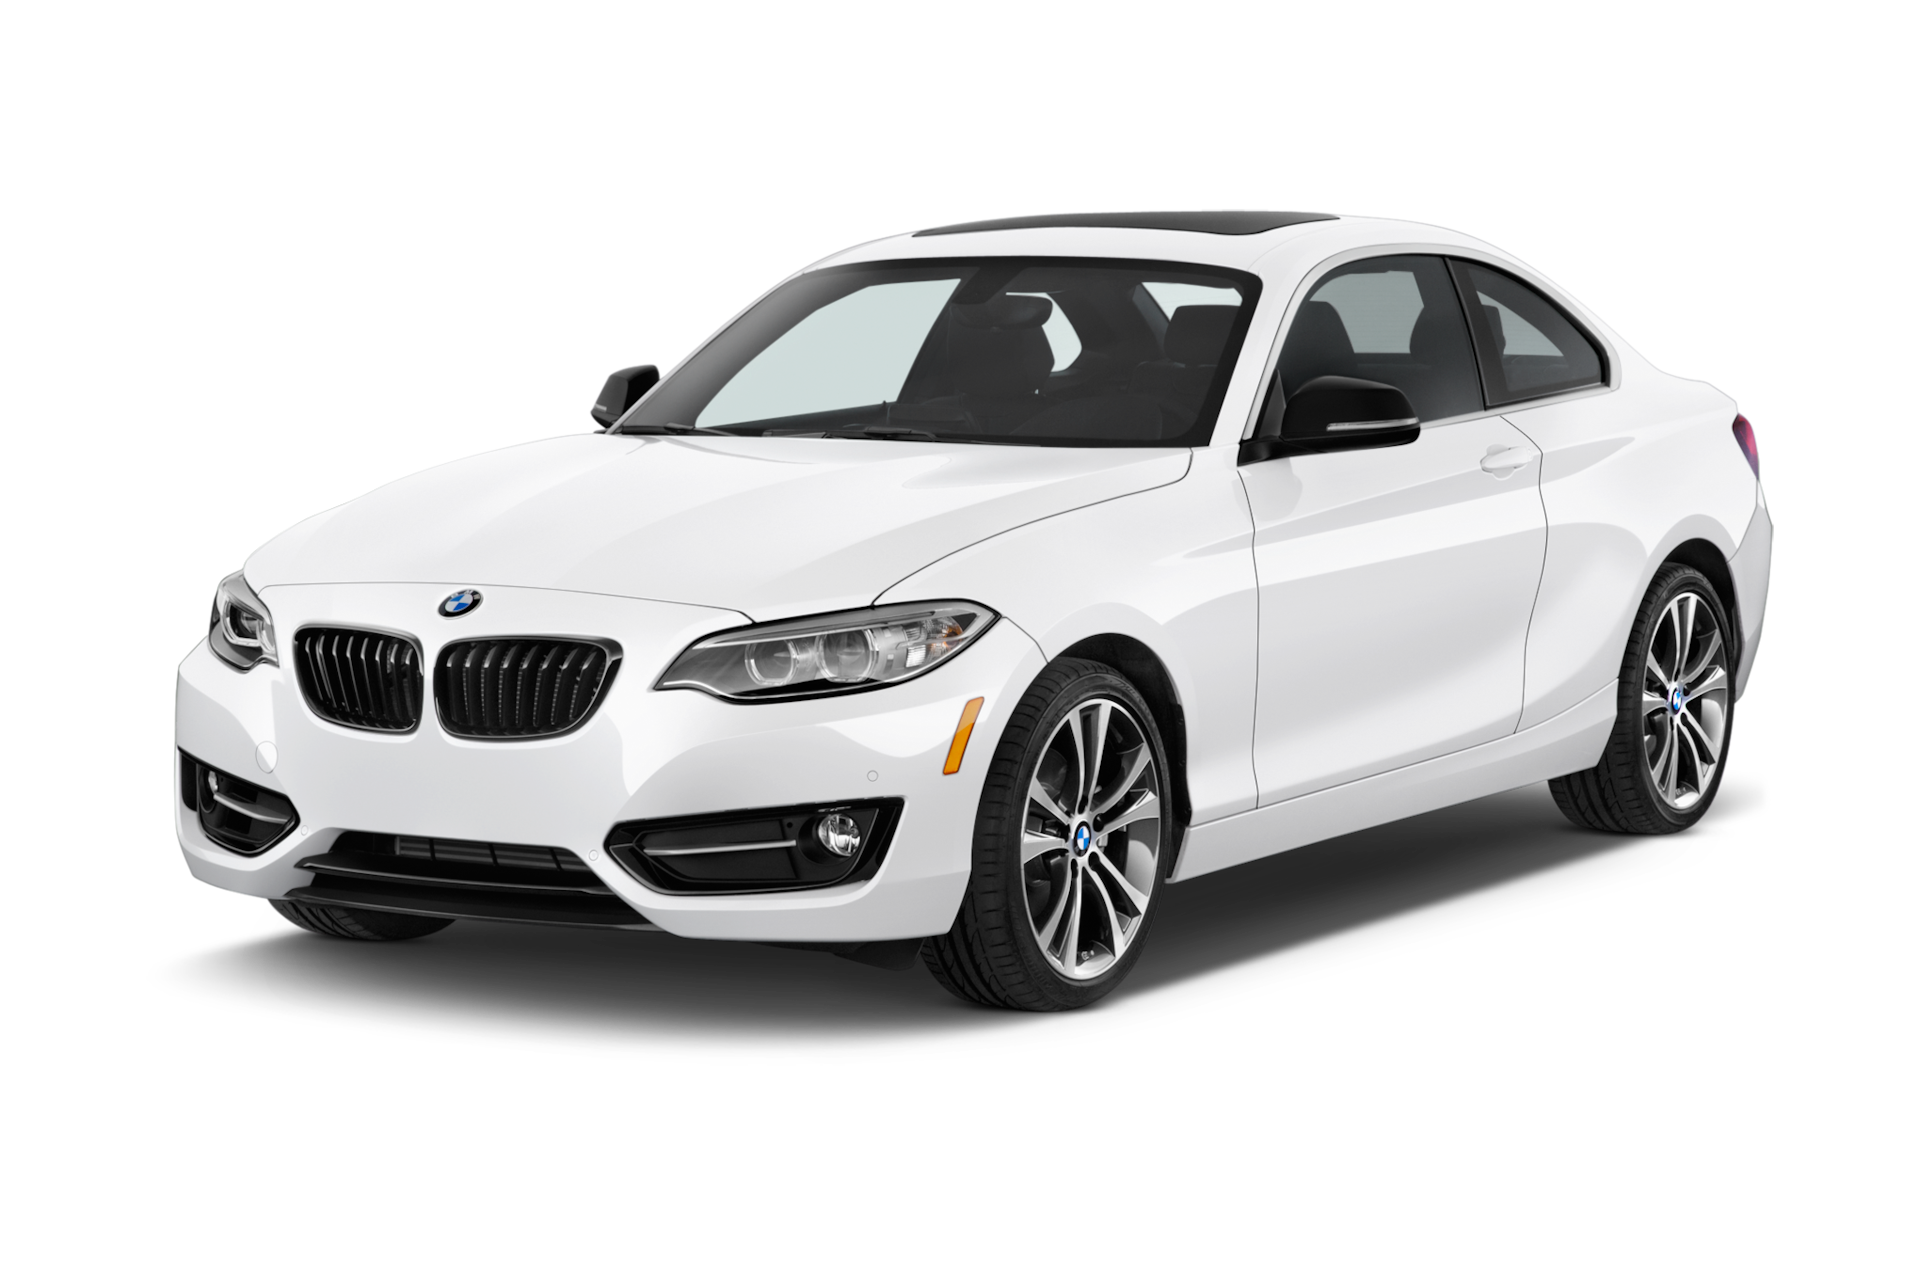 2017 BMW 2-Series Prices, Reviews, and Photos - MotorTrend